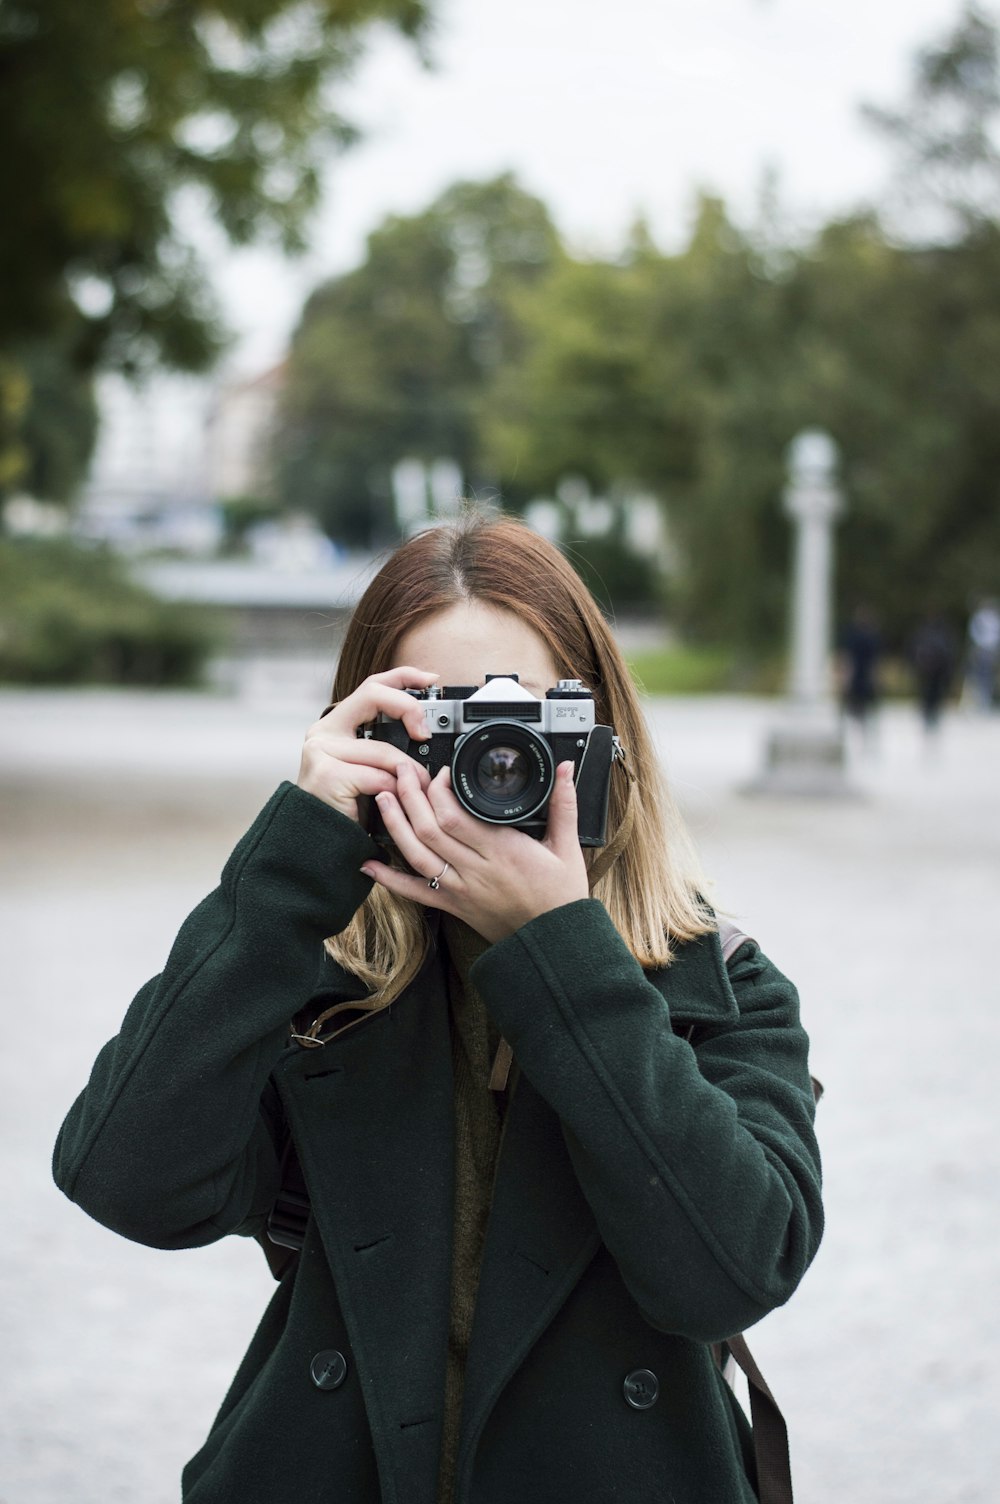 woman using SLR camera near trees during day